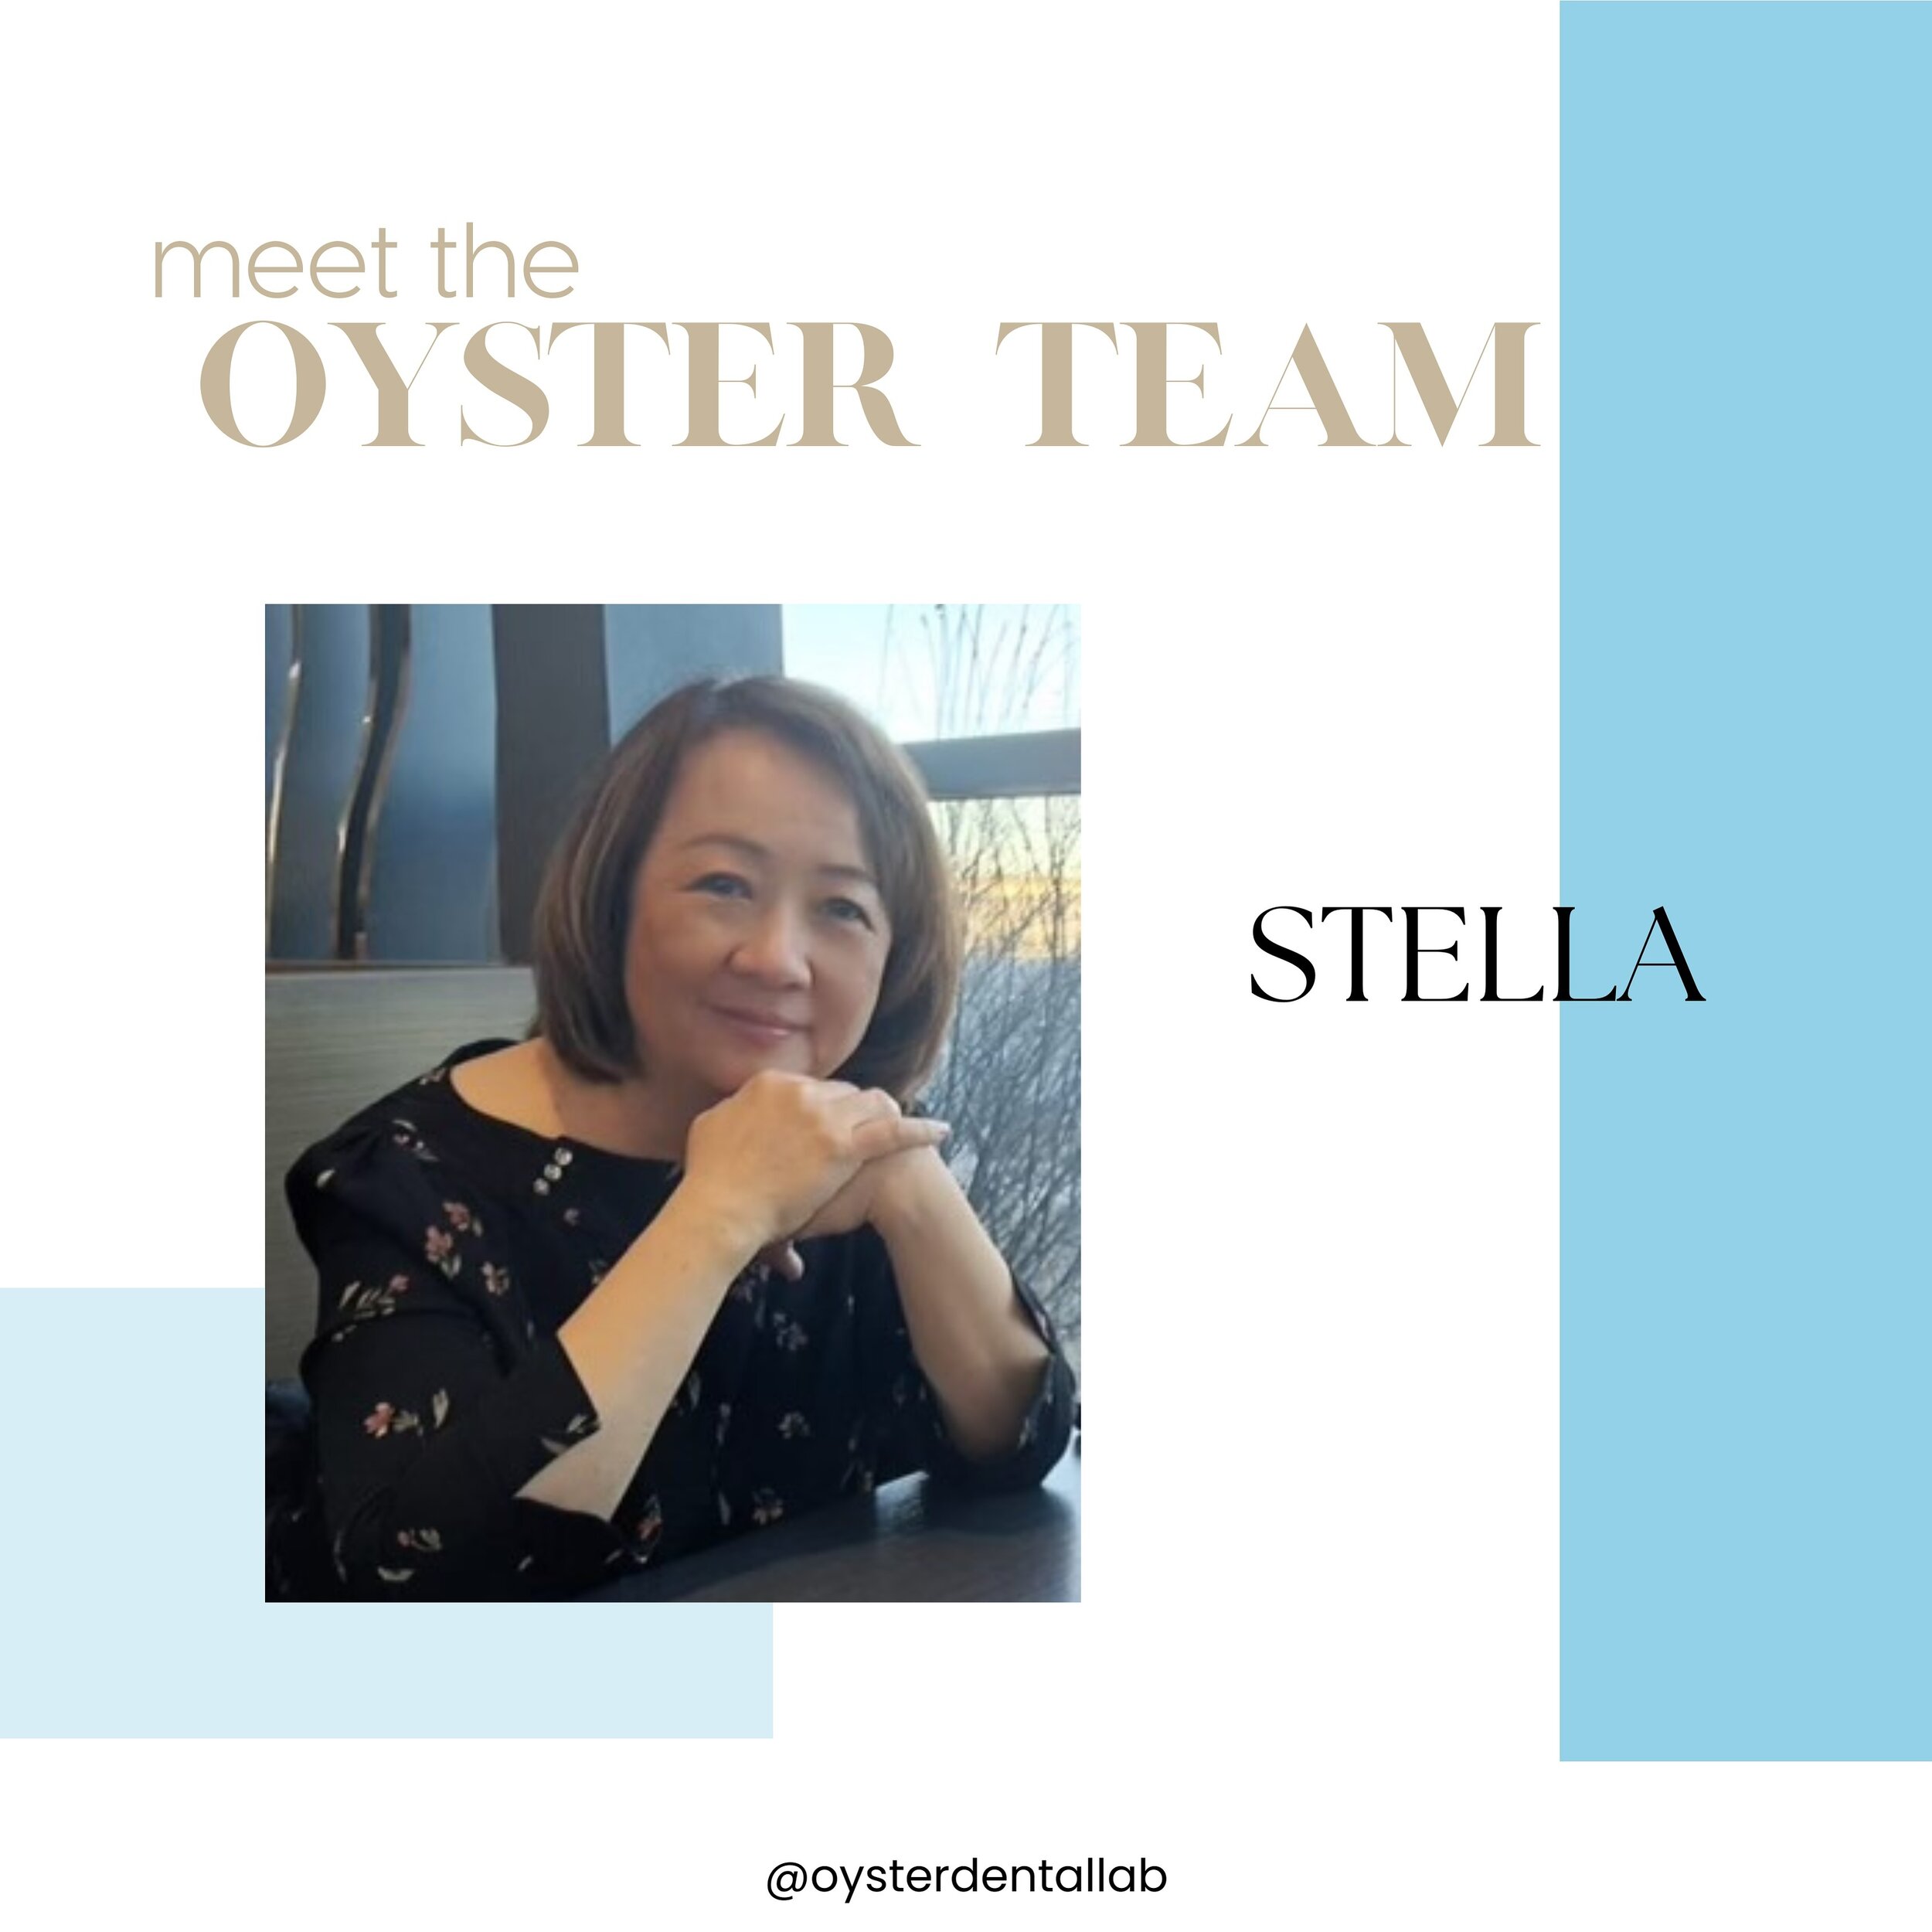 MEET STELLA🦷✨

Stella is the head of our removable prosthodontics department and is an expert in her field. She has been a valued member of our team for many years!